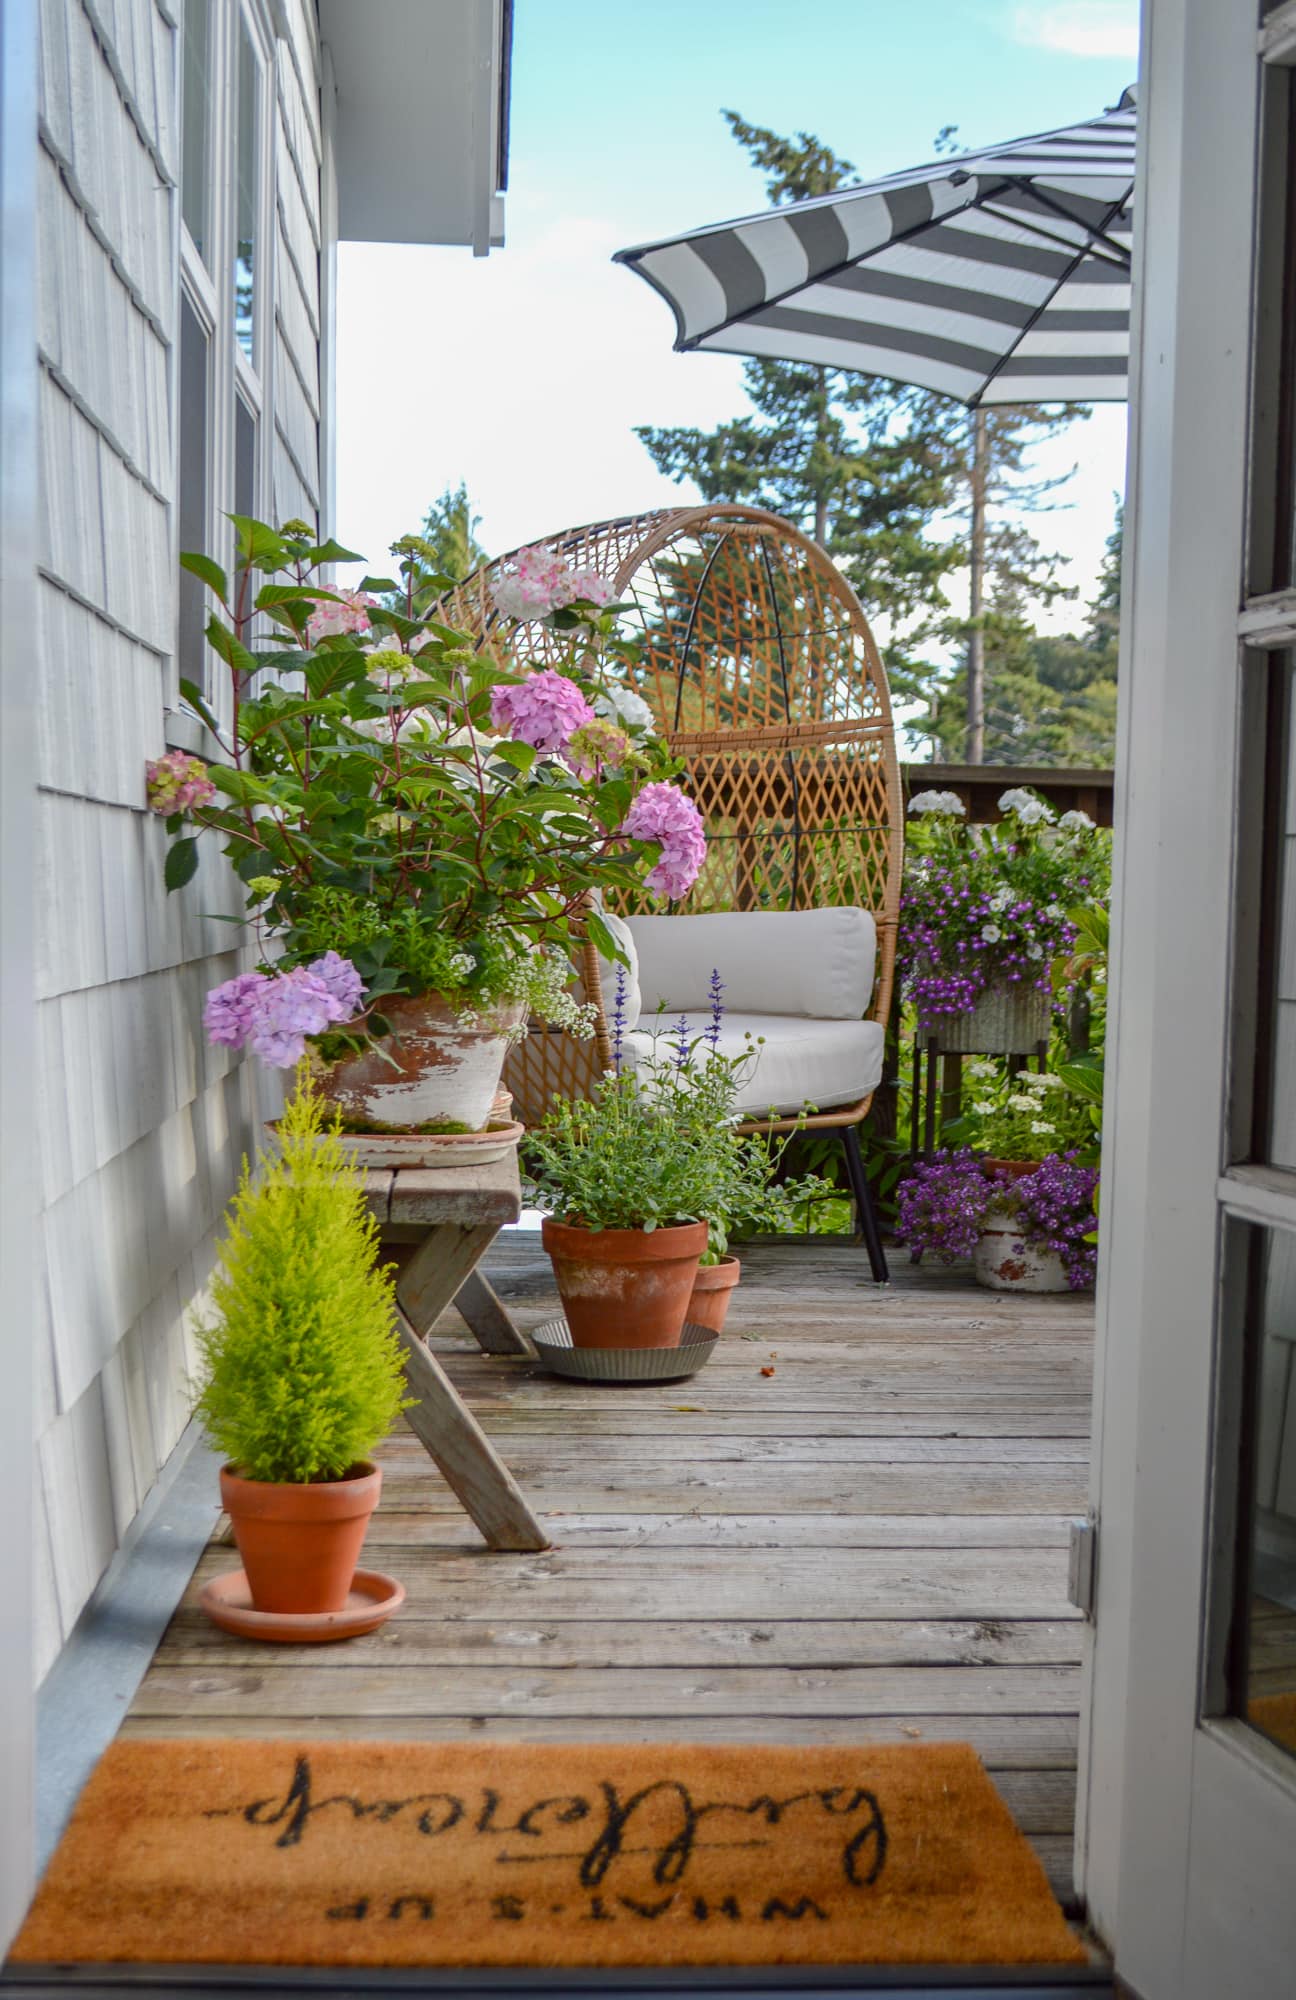 patio with plants and flowers in pots for a container garden